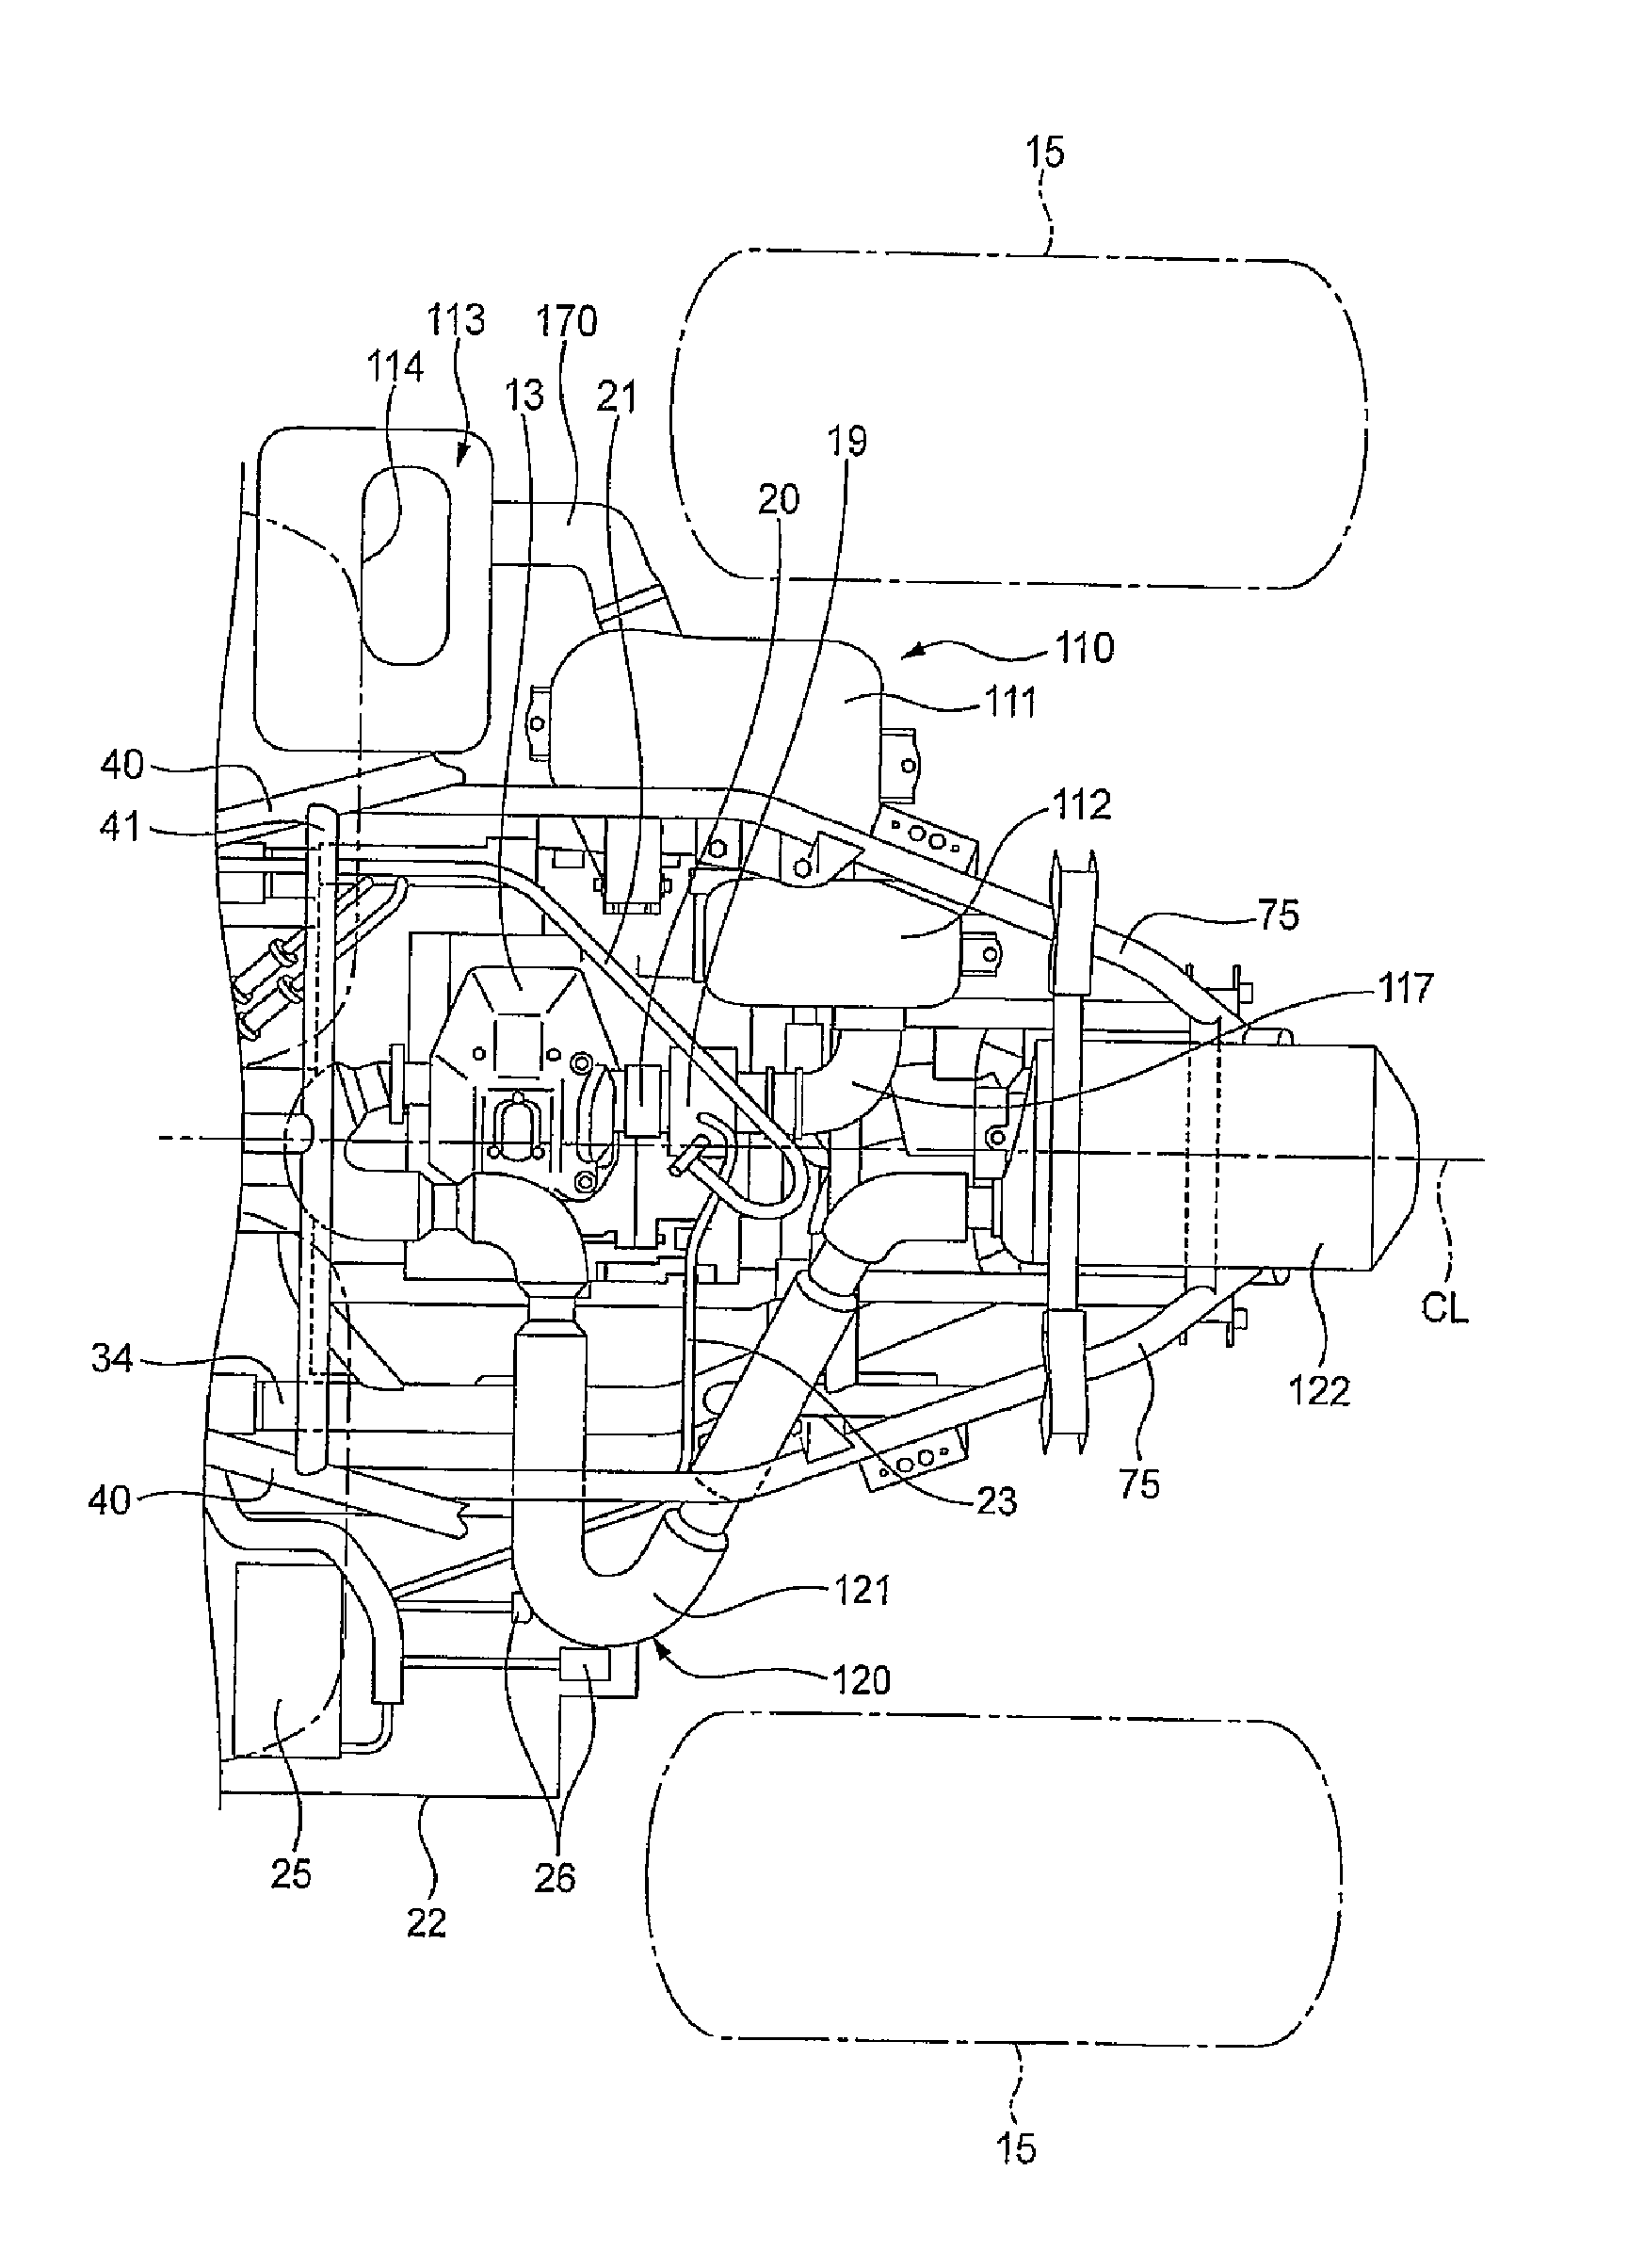 Intake structure of vehicle